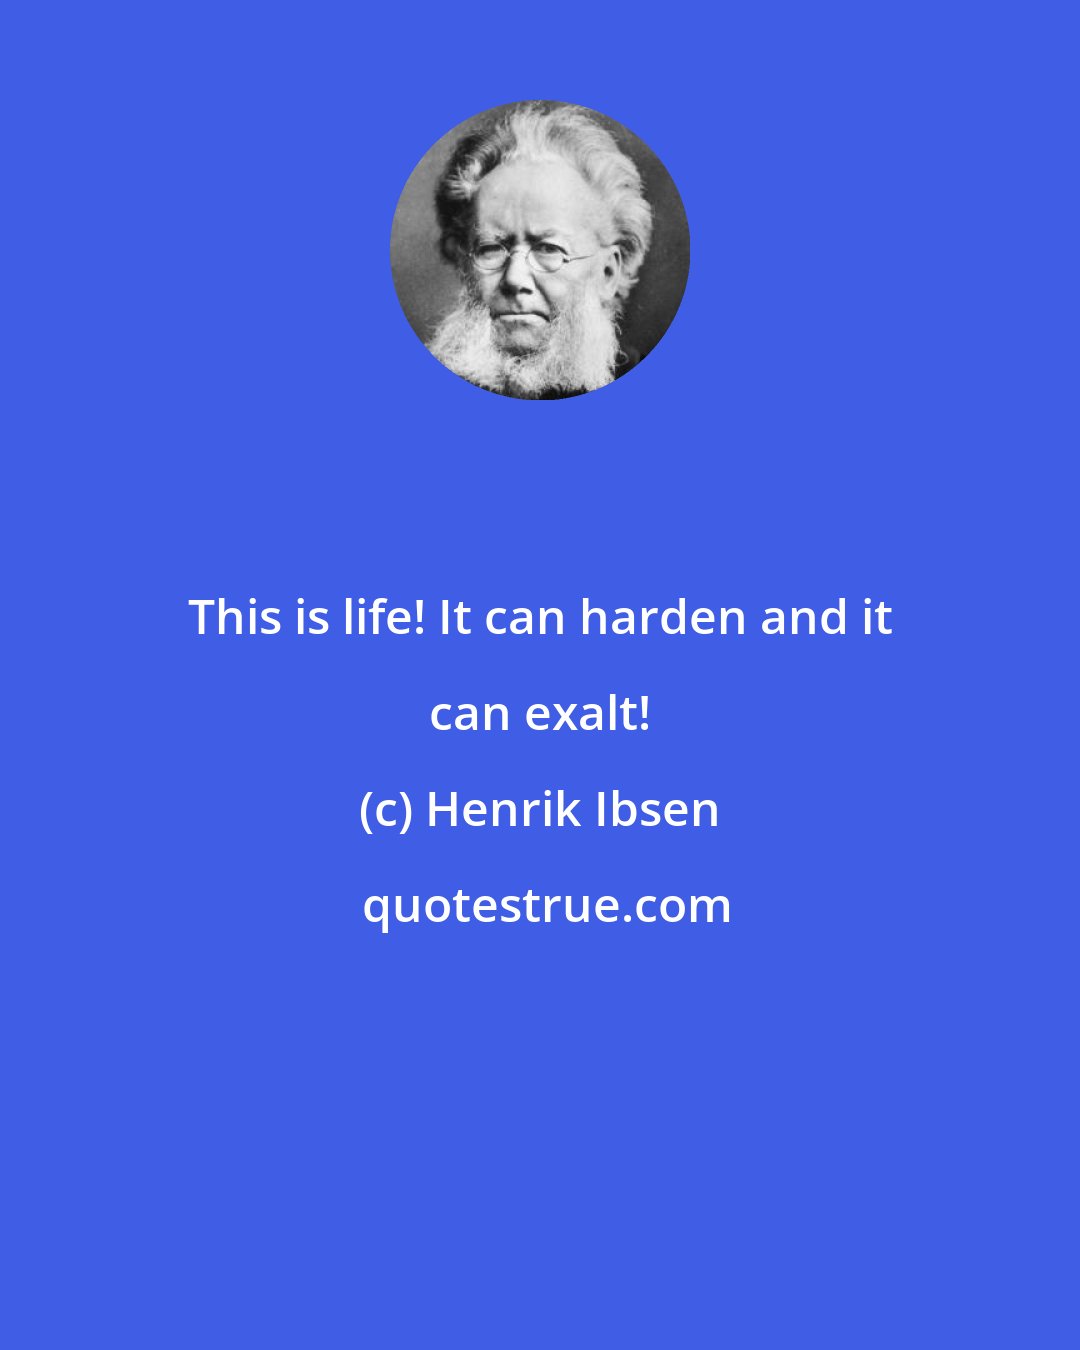 Henrik Ibsen: This is life! It can harden and it can exalt!